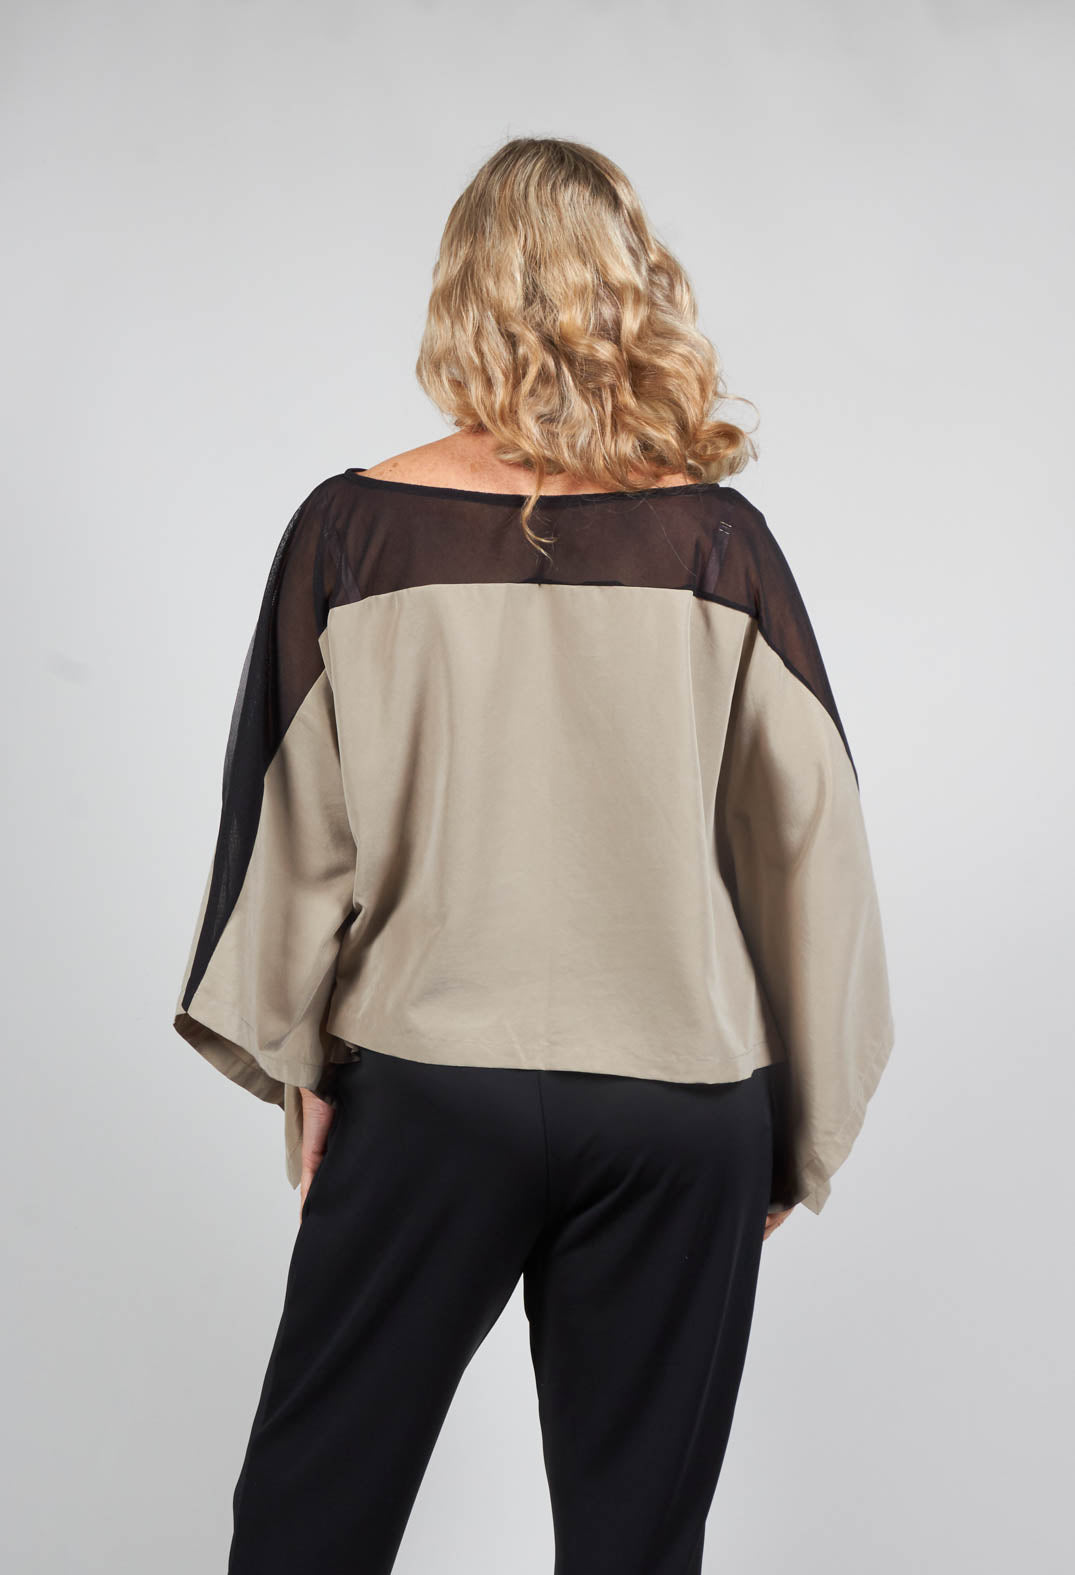 Cape Style Top with Cut Out Shoulder in Black / Beige